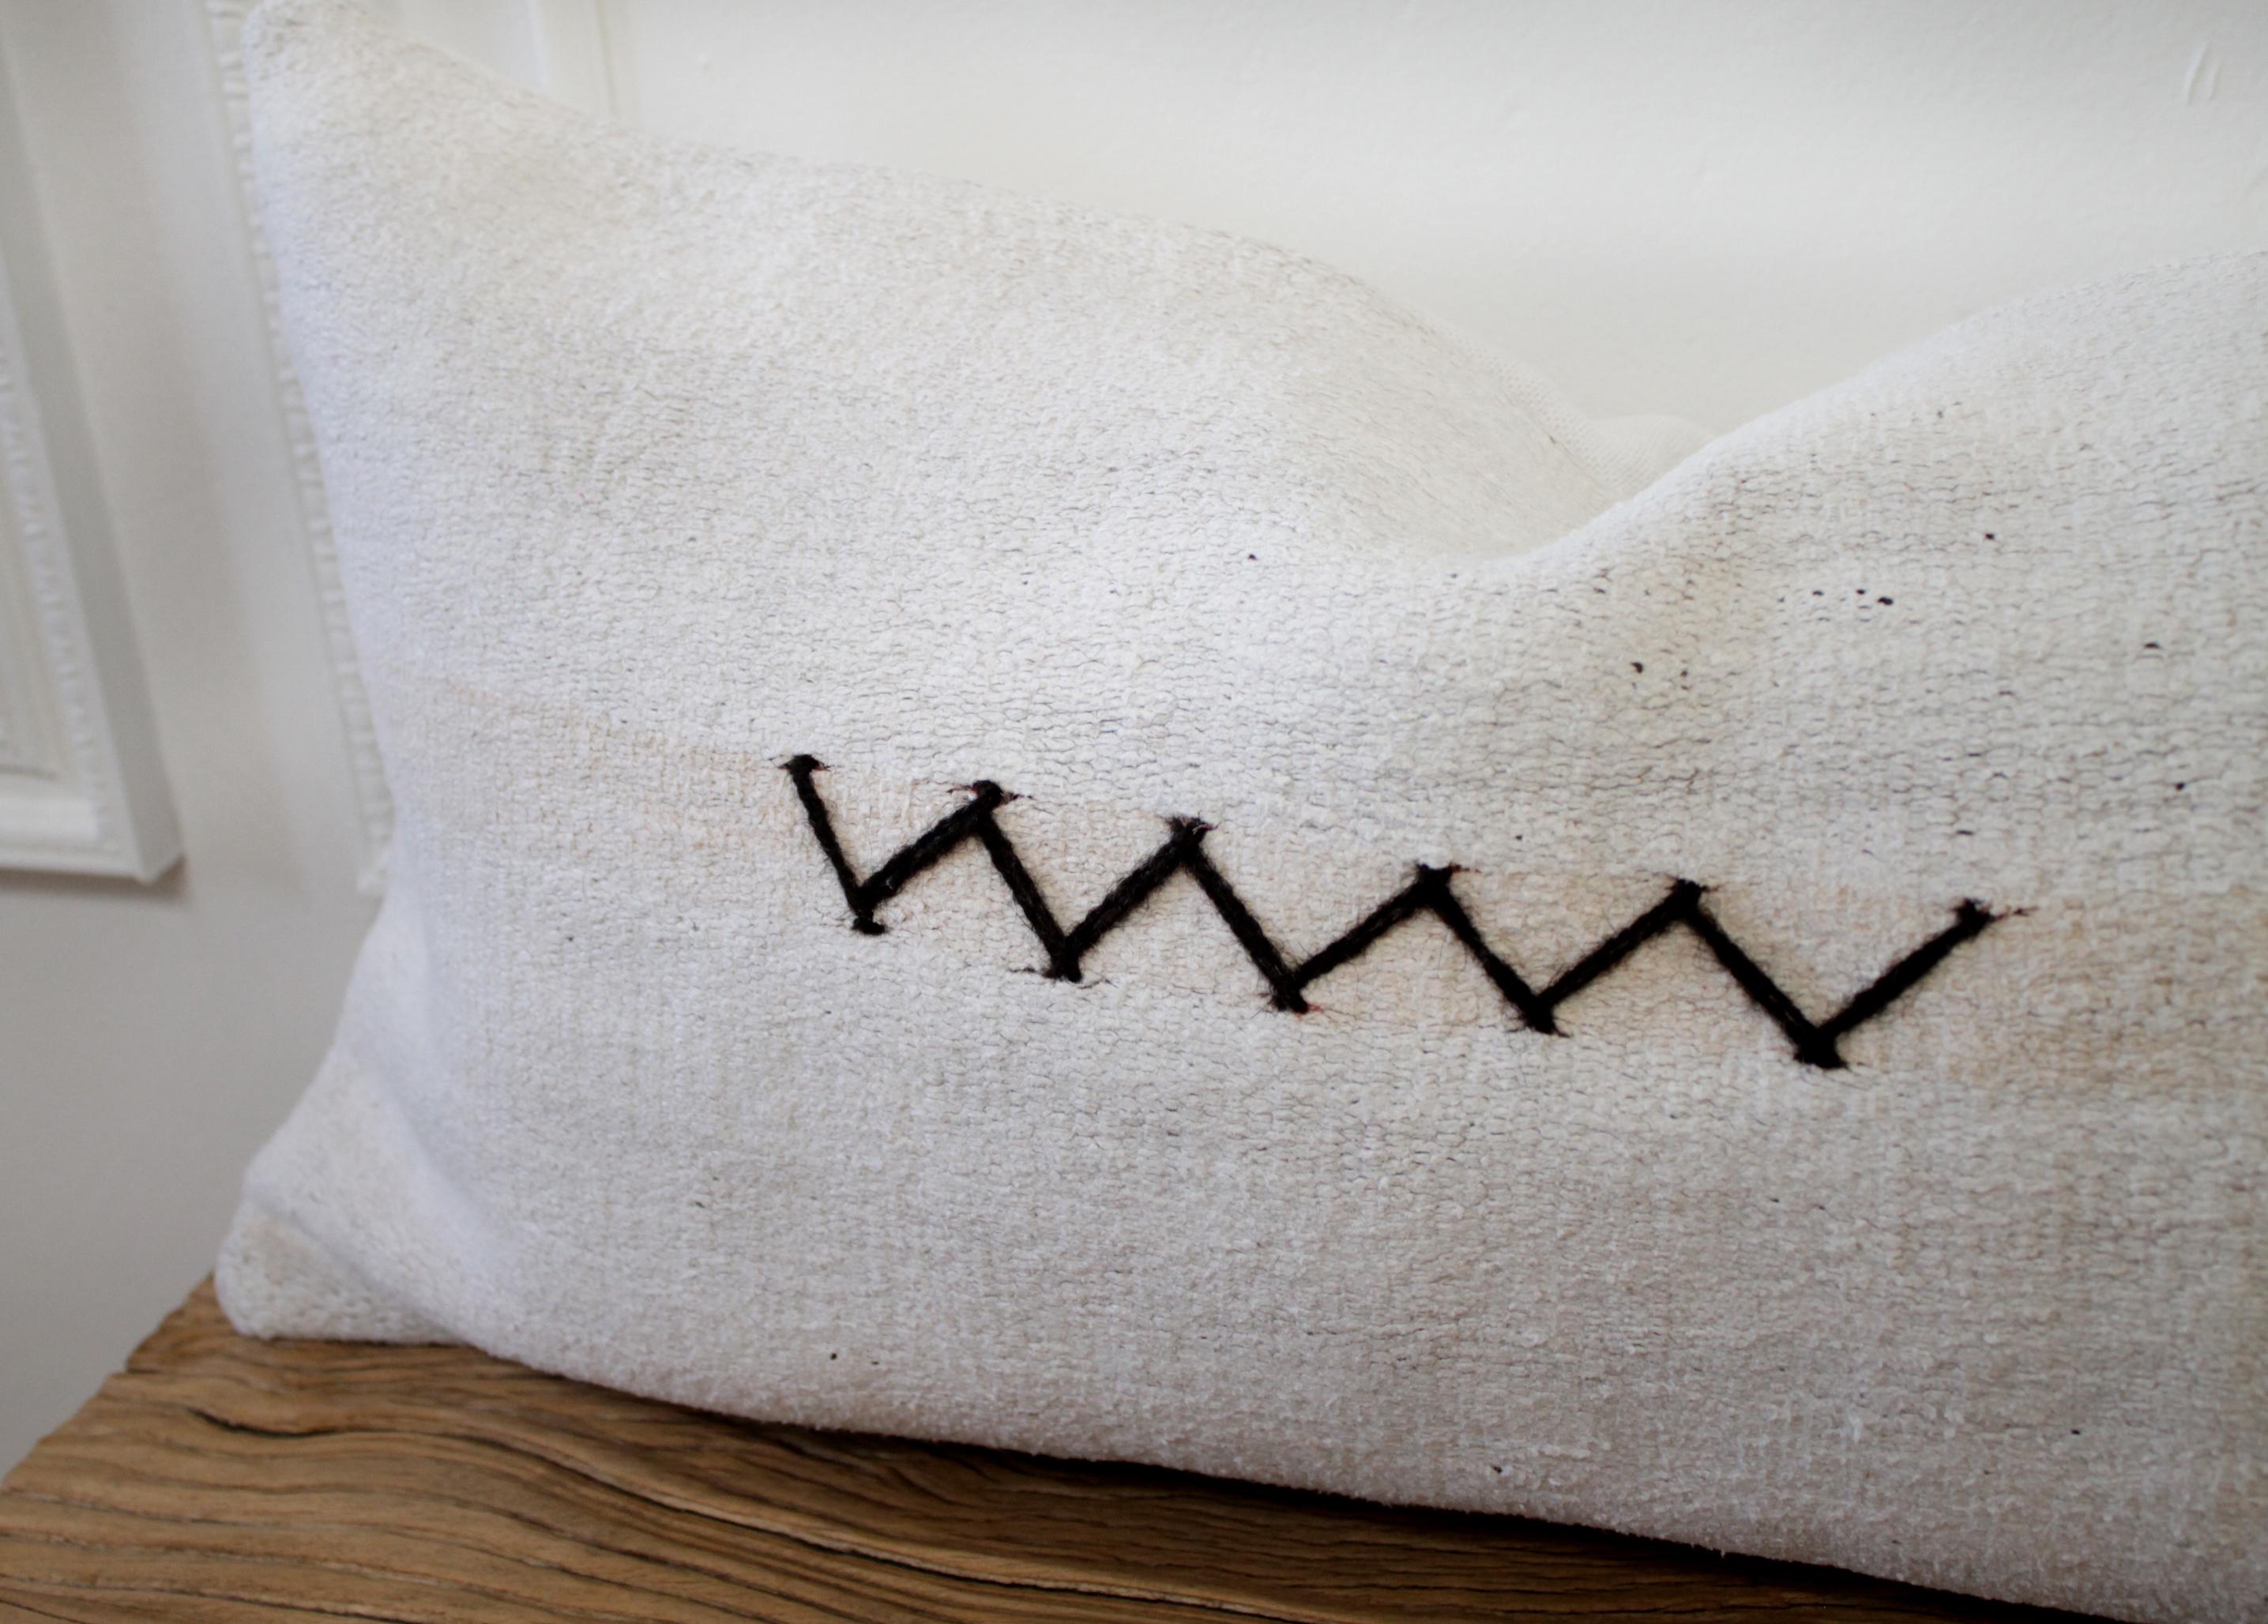 Vintage Turkish Hemp rug pillow in off-white with stitched pattern on face of the pillow. This is a beautiful original hemp rug, in a white to off white color with goat hair textured Minimalist zig zag pattern. The backside is a coordinating fabric